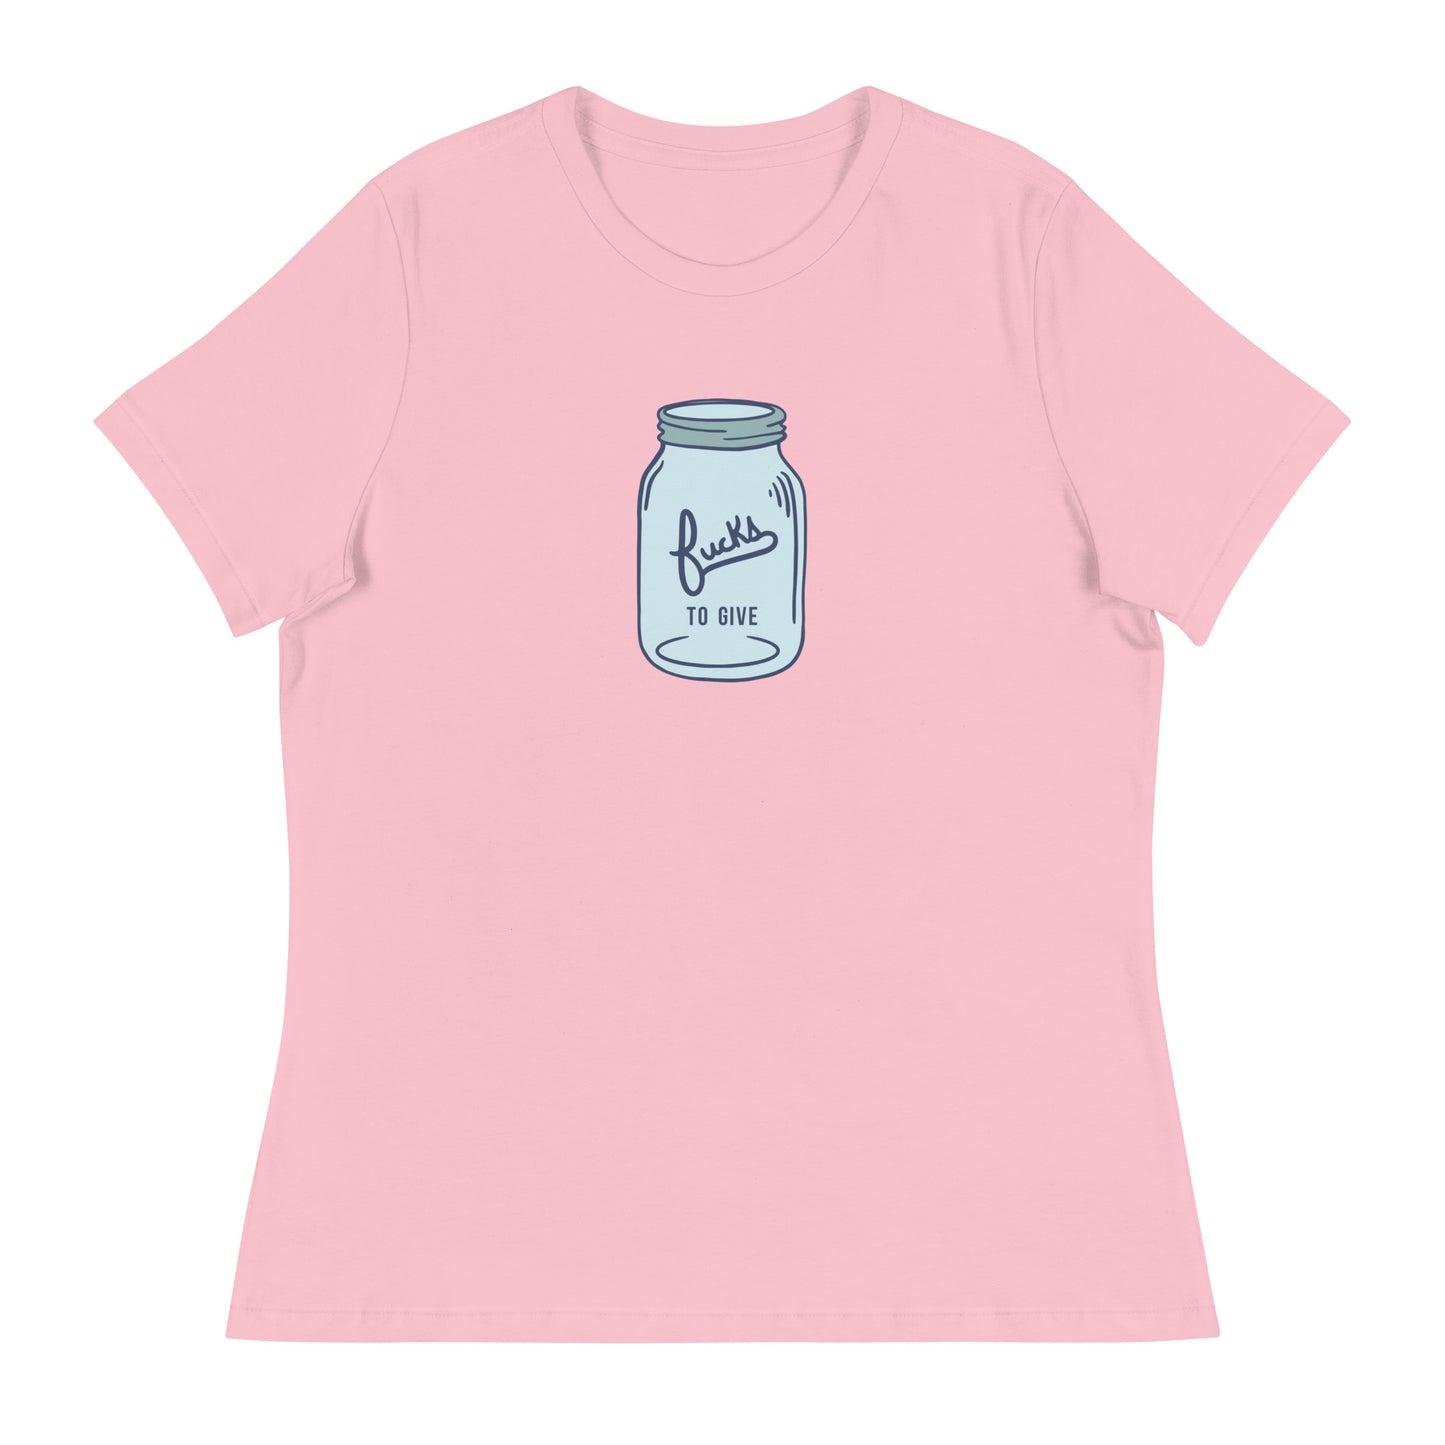 Shirt with a design featuring an empty mason jar and the phrase fucks to give